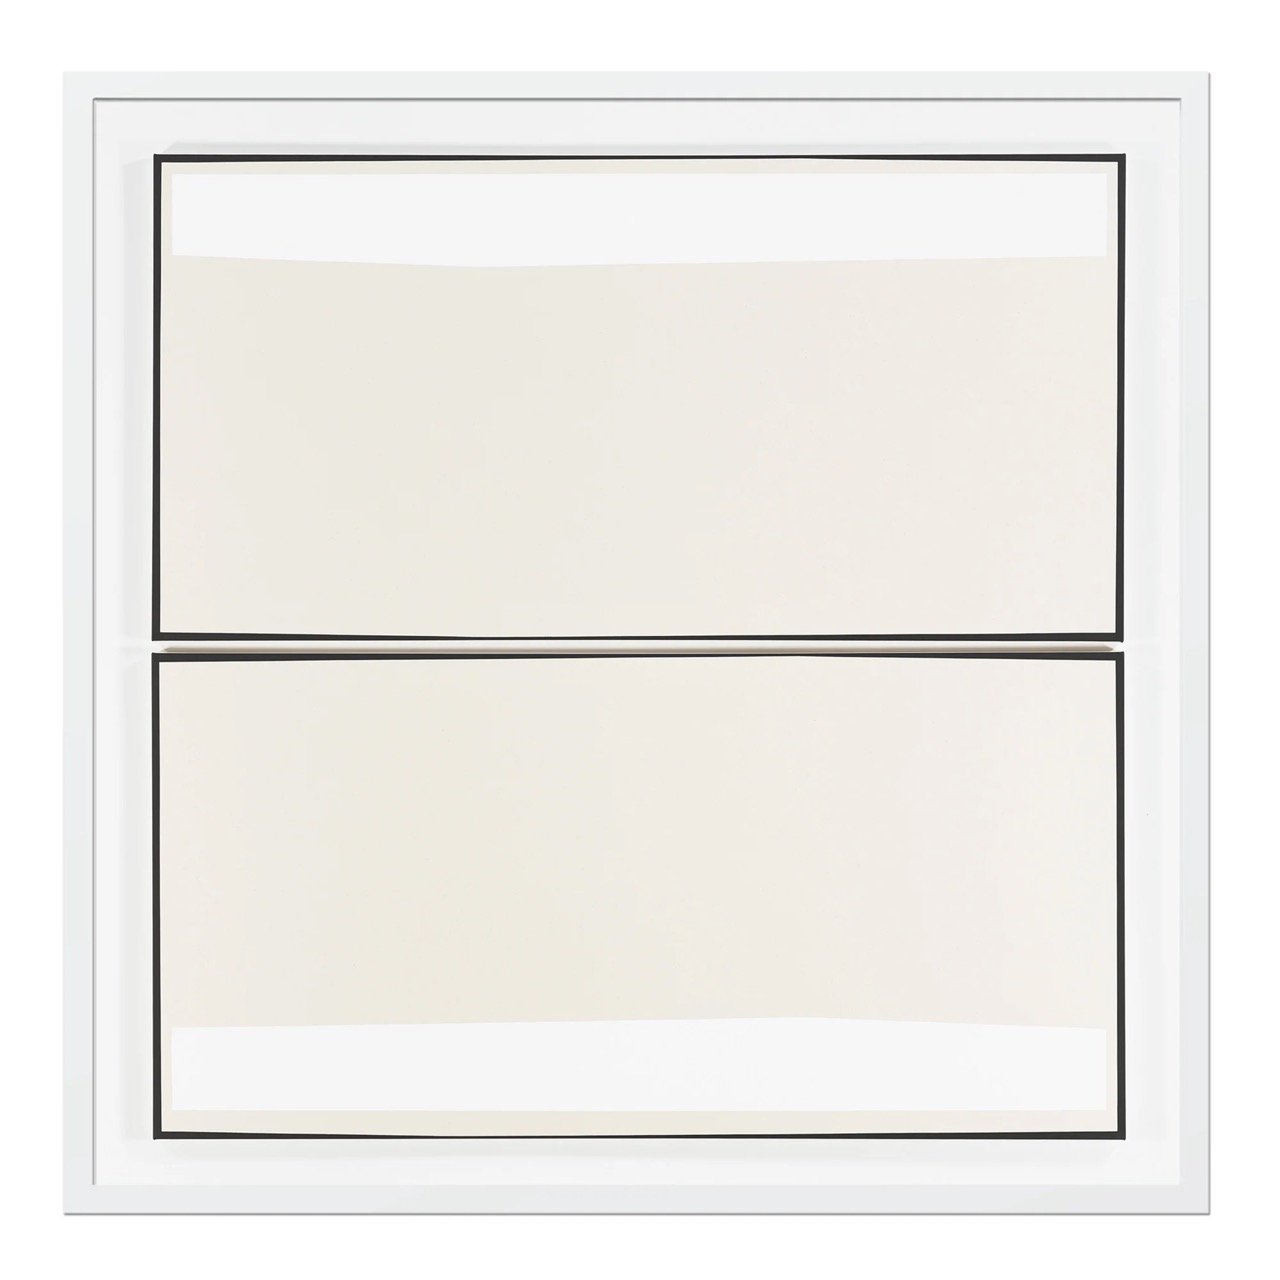   Peter Demos  Untitled (Horizon) , 2016  Archival pigment print, 30 x 30 inches   (Framed Example) 